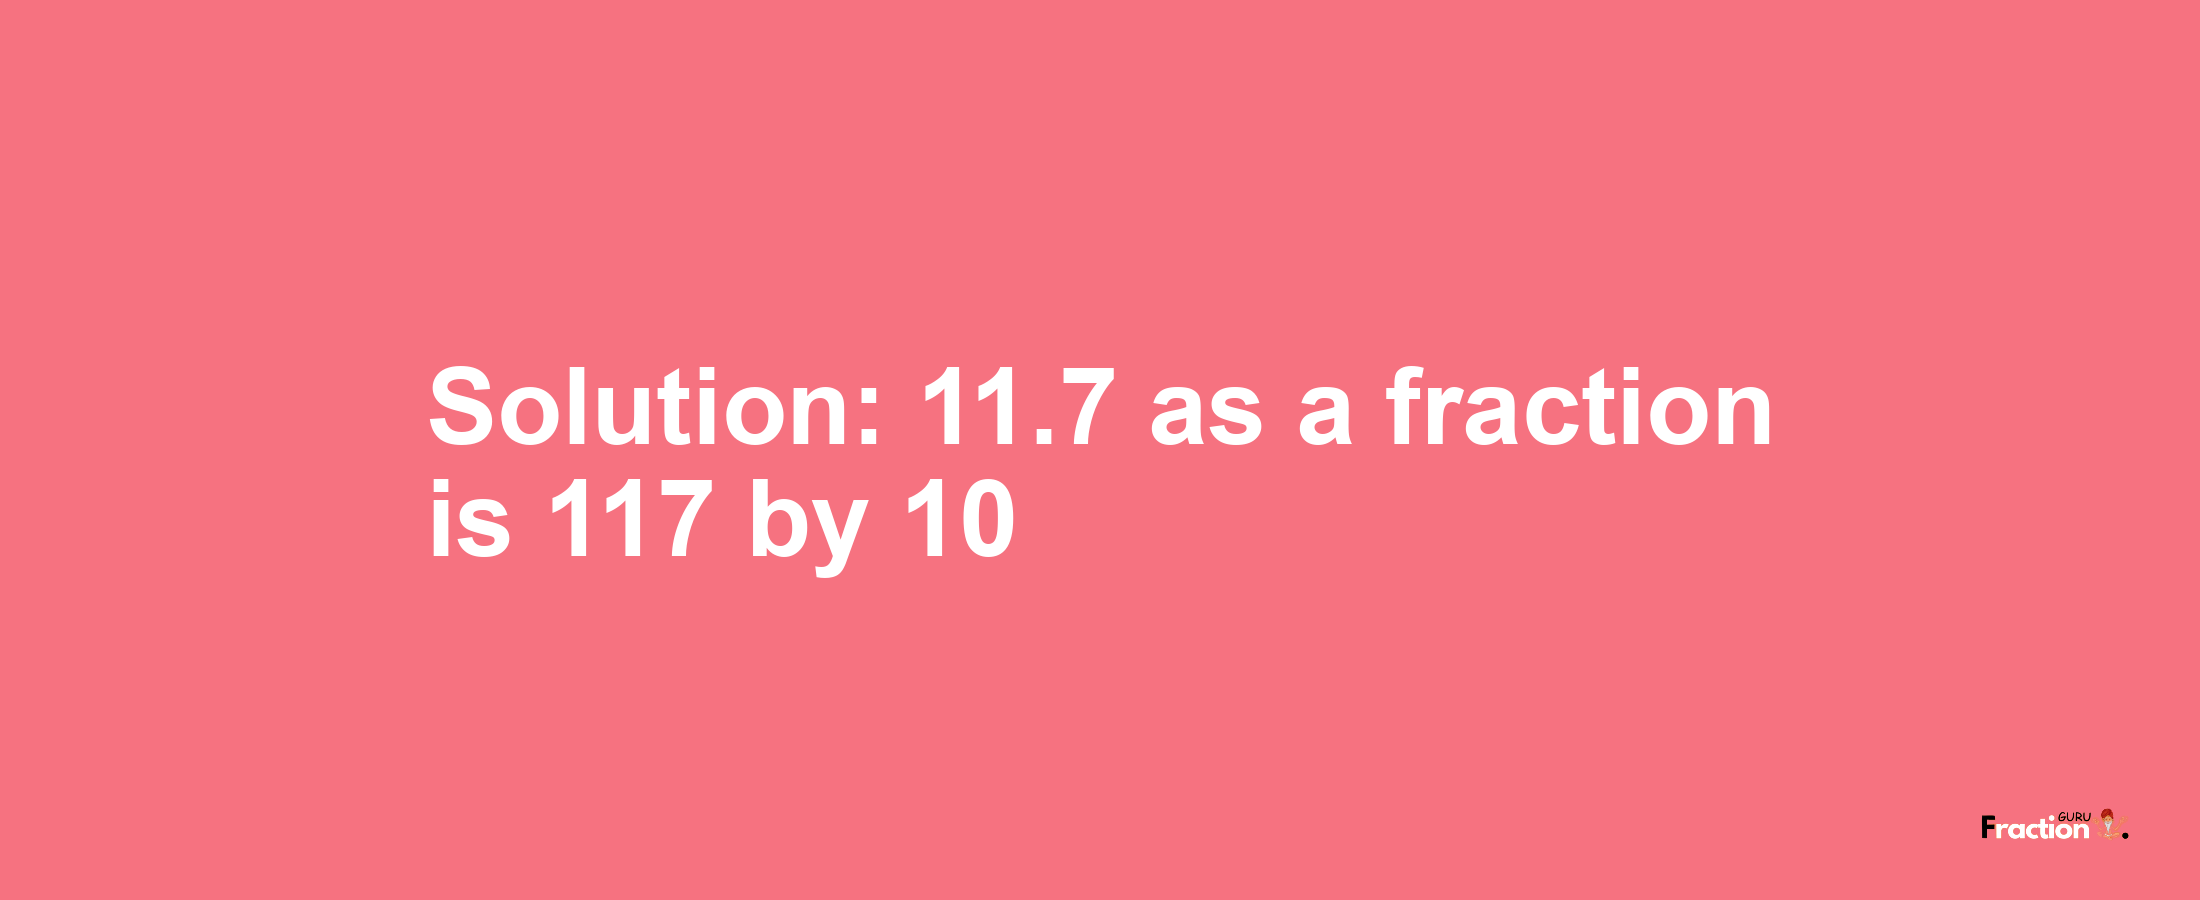 Solution:11.7 as a fraction is 117/10